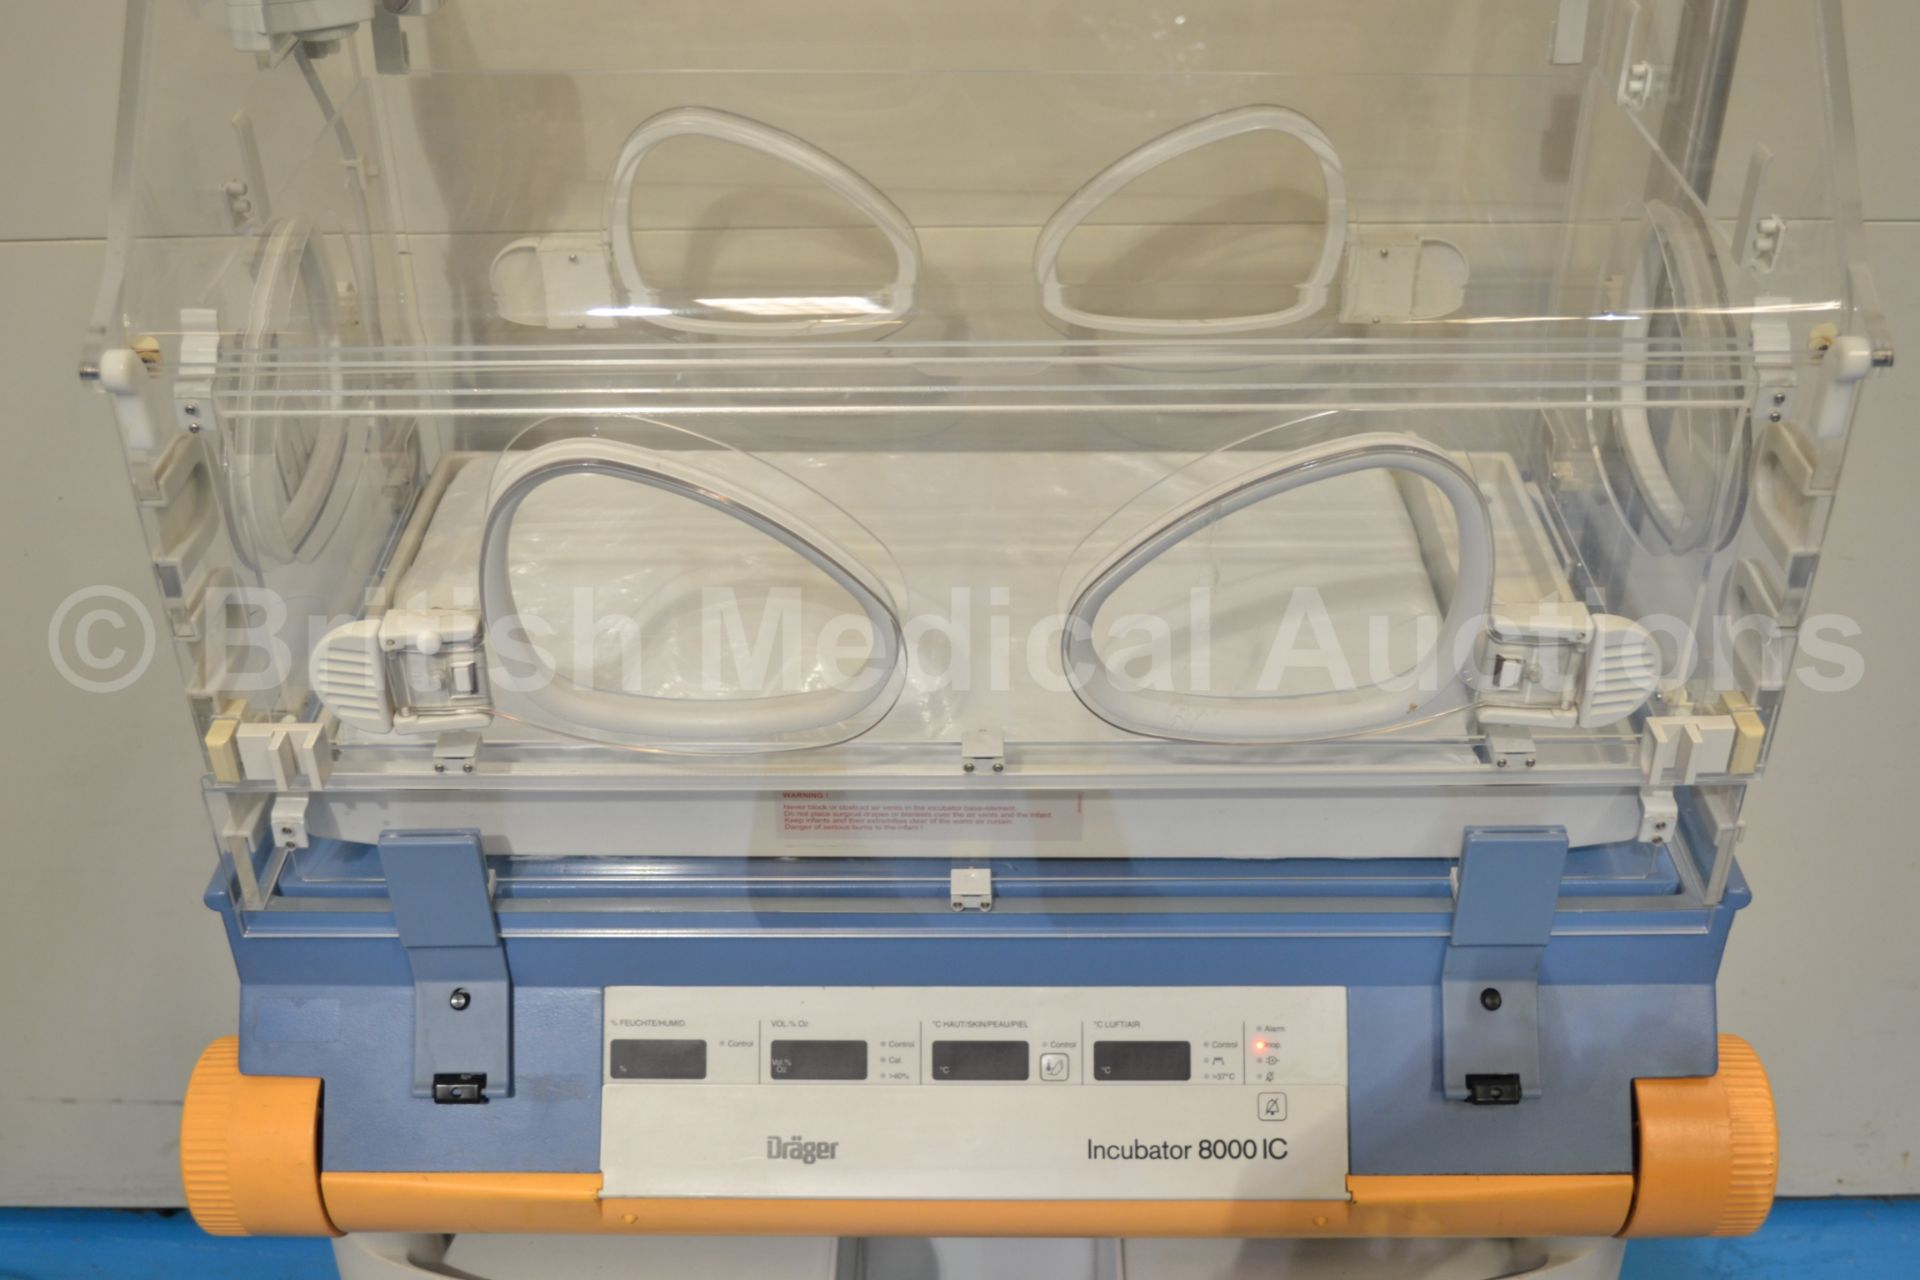 Drager Incubator 8000 IC (Powers Up but Blank Scre - Image 4 of 4